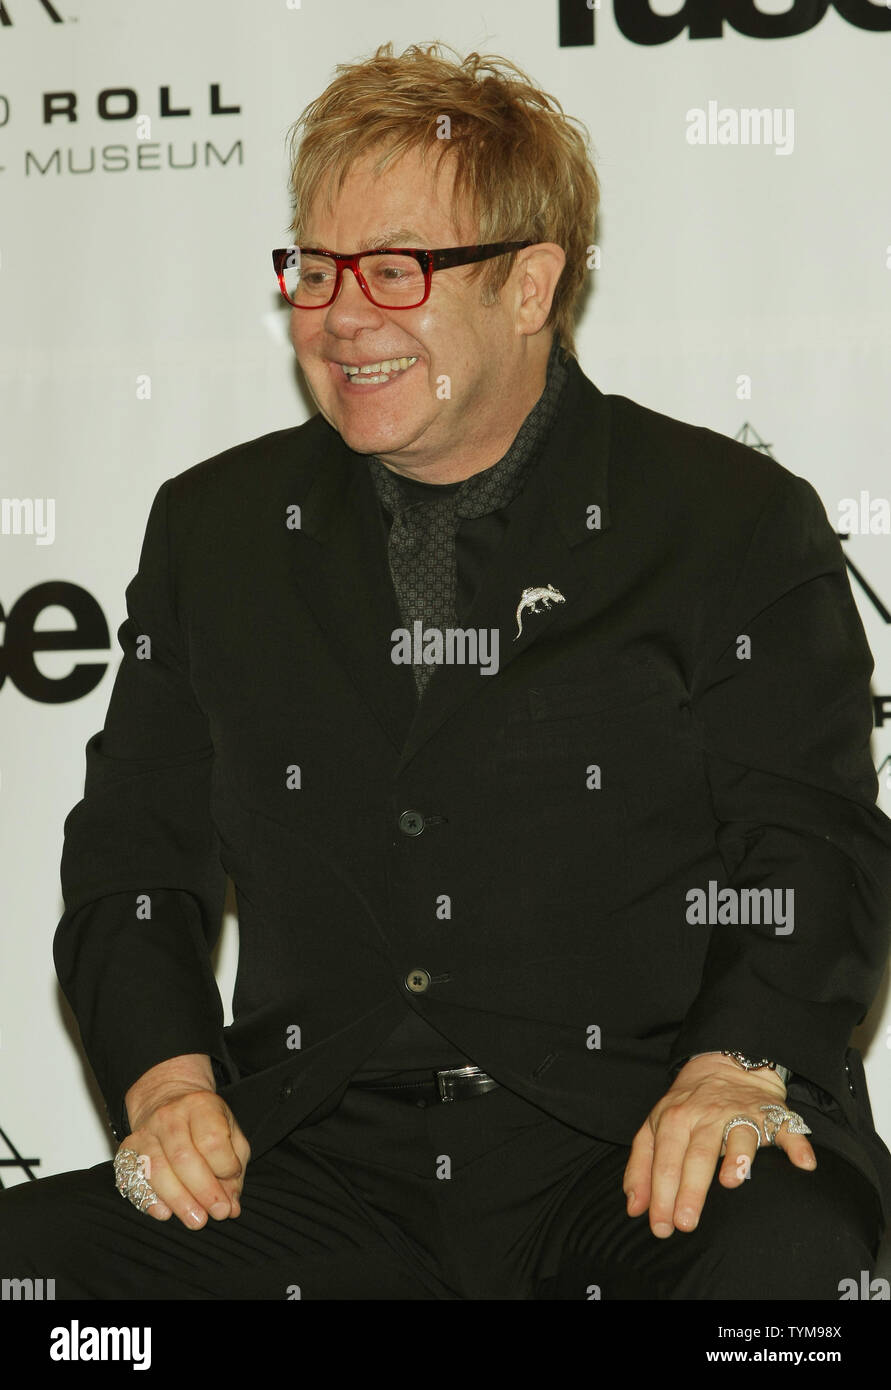 Elton John talks to reporters at the Rock and Roll Hall of Fame induction ceremony where he will introduce inductee Leon Russell at the Waldorf-Astoria hotel in New York on March 14, 2011.      UPI Photo/Monika Graff... Stock Photo